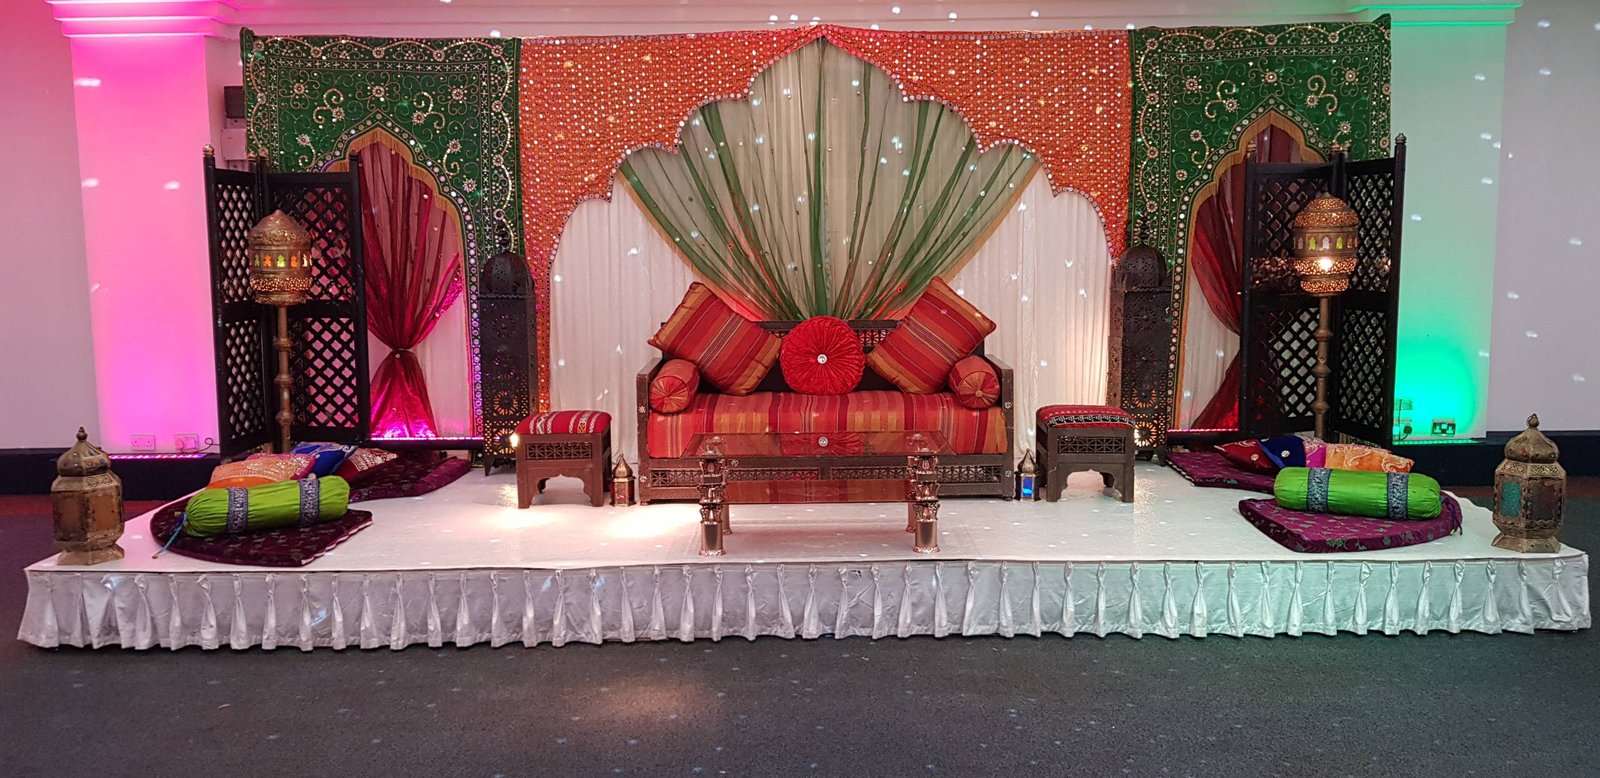 Planning your Indian wedding